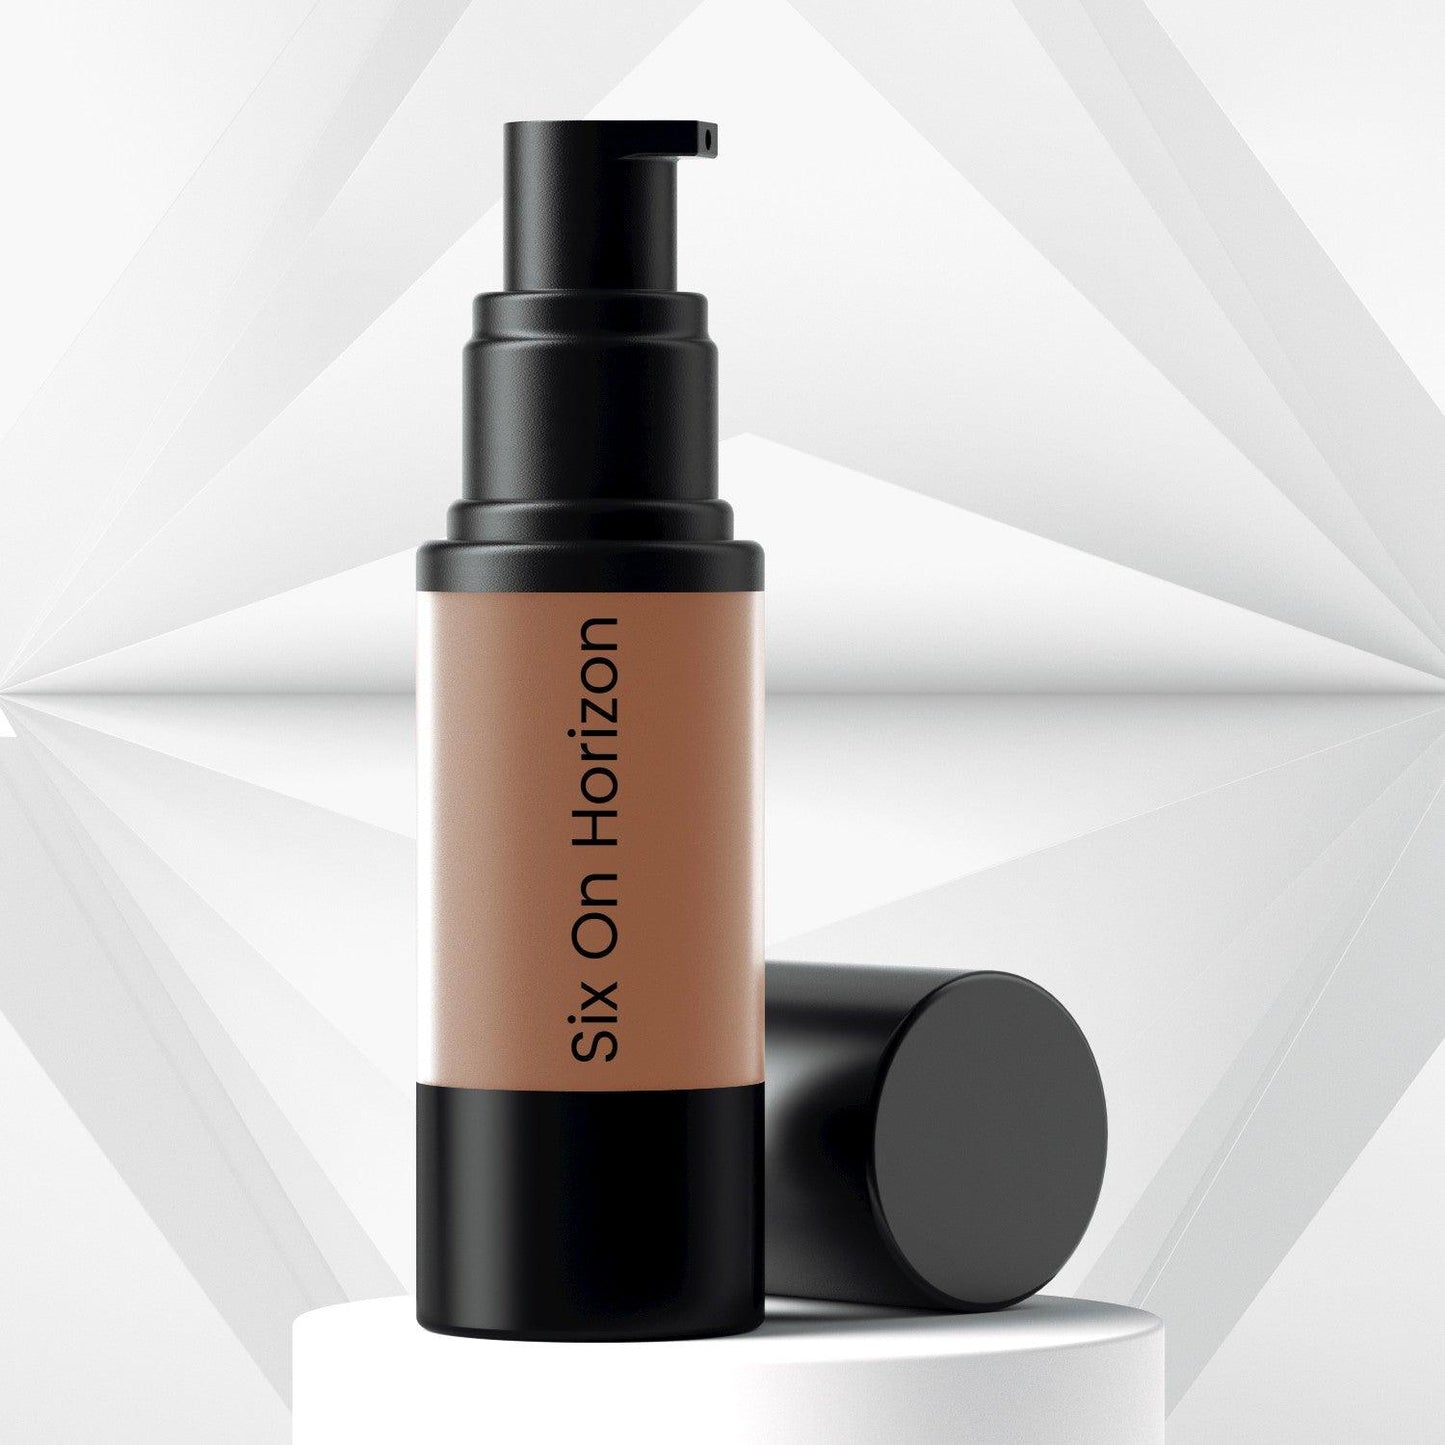 Camera-ready Foundations - six-on-horizon Anti-aging, Biodegradable, Cruelty-free, Eco-friendly packing, For all skin types, Gluten-free, Made in Canada, Made in small-batches, Natural, No artificial colours, Not sourced from China, Paraben-free, subscriber, Talc-free, Vegan 40.00 www.sixonhorizon.com